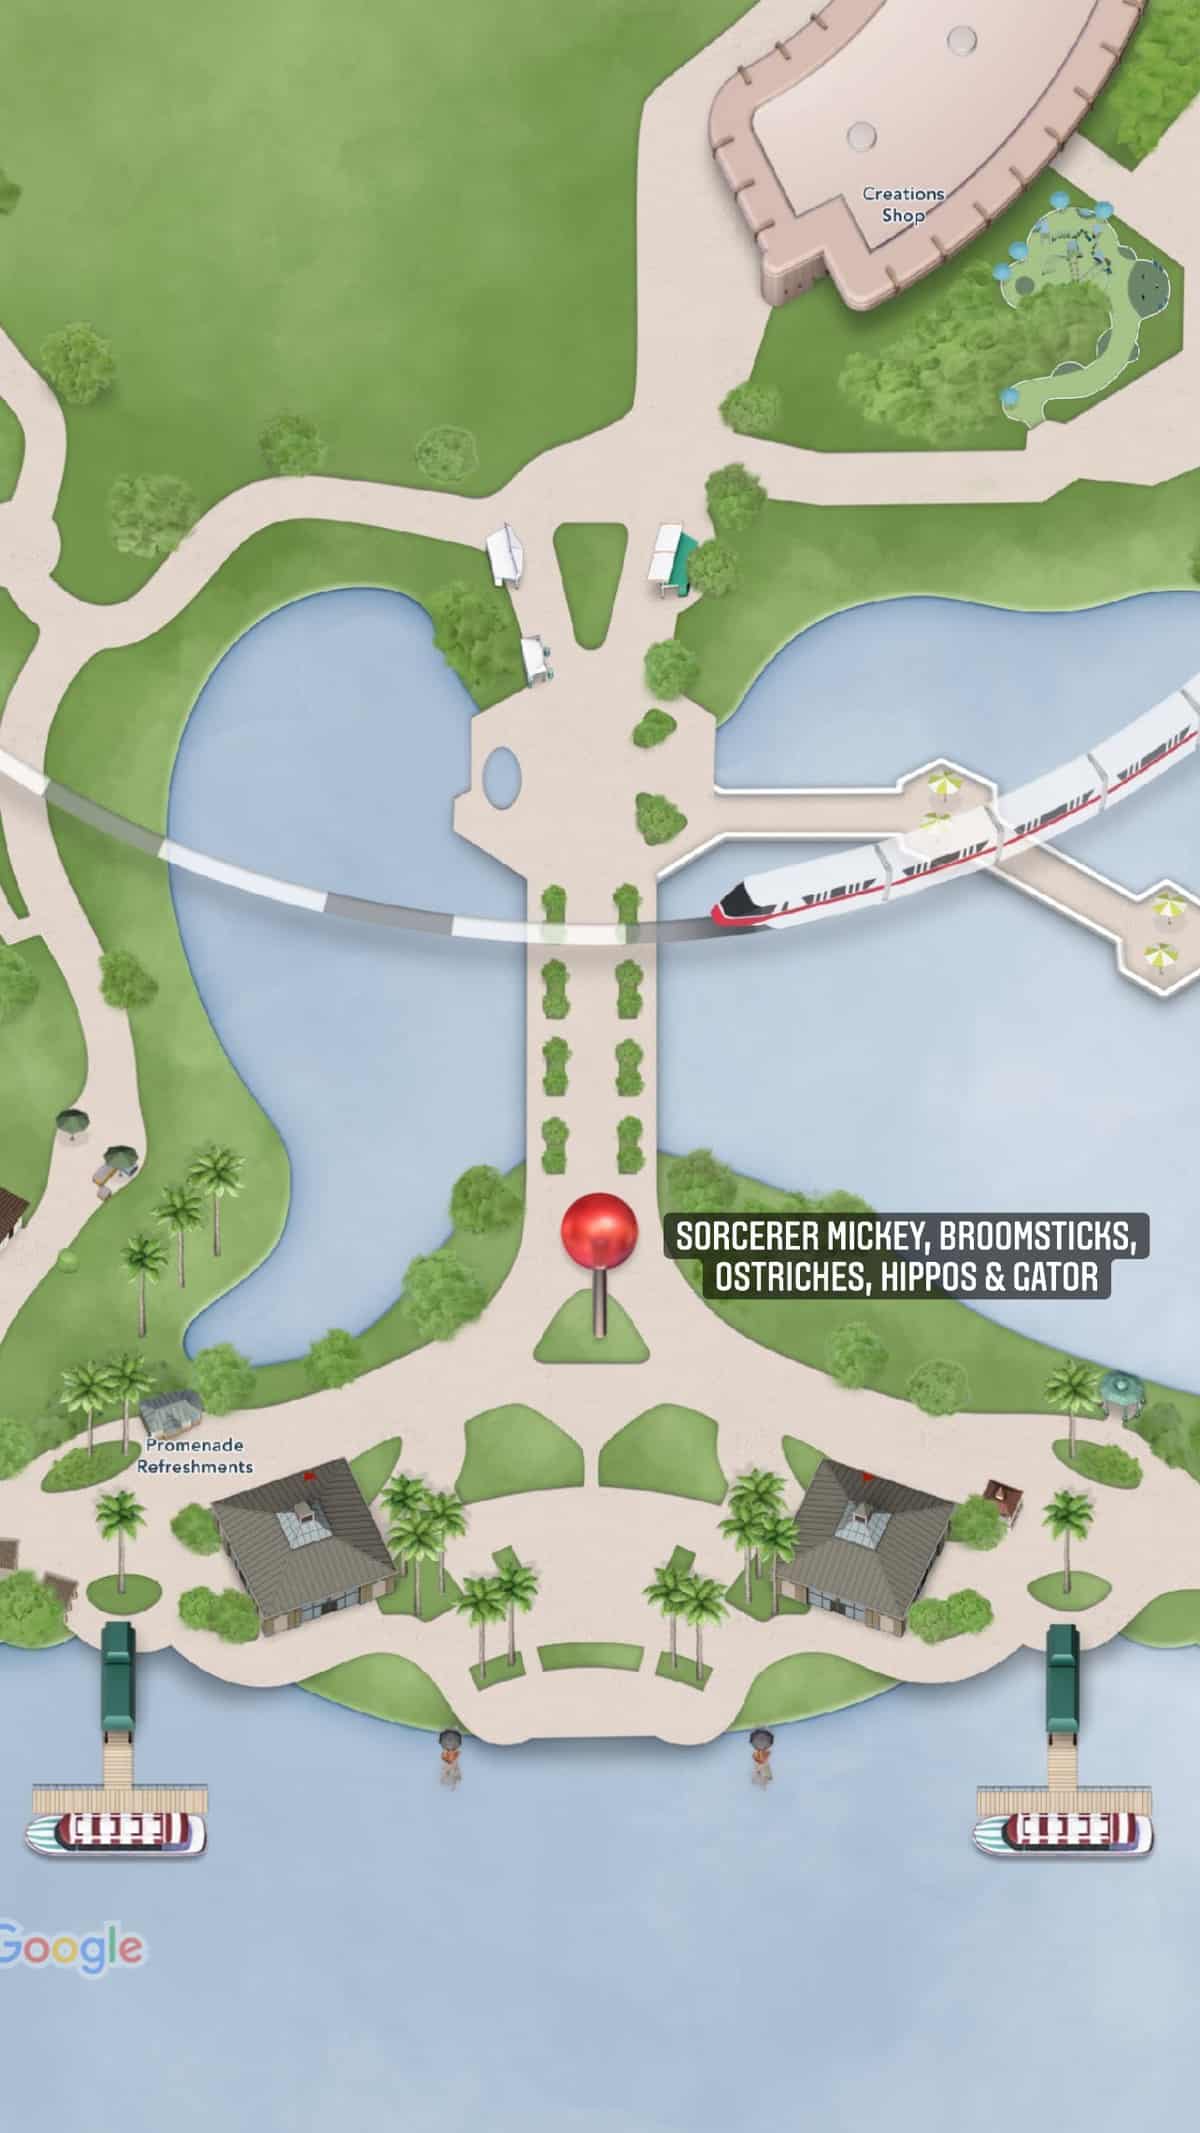 Epcot 2022 Flower and Garden Festival - Sorcerer Mickey, Brooms, Ostriches, Hippo, Gator topiaries map